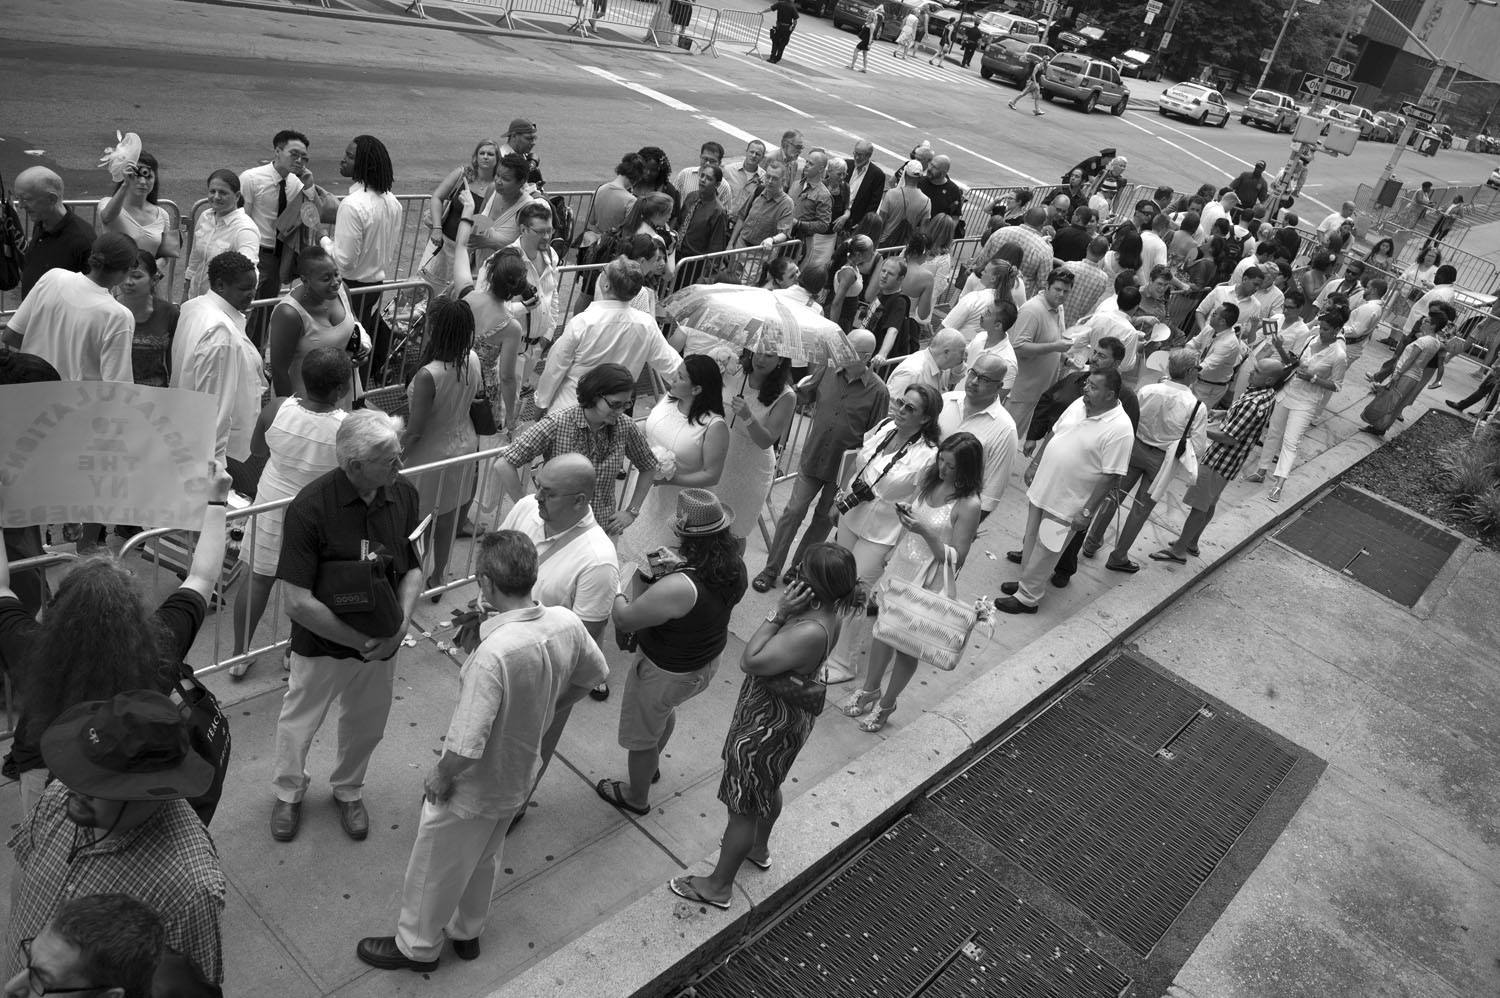 The line outside the Clerk's office stretched down the block. By the end of the day, the city of New York had issued 659 marriage licenses throughout the five boroughs.